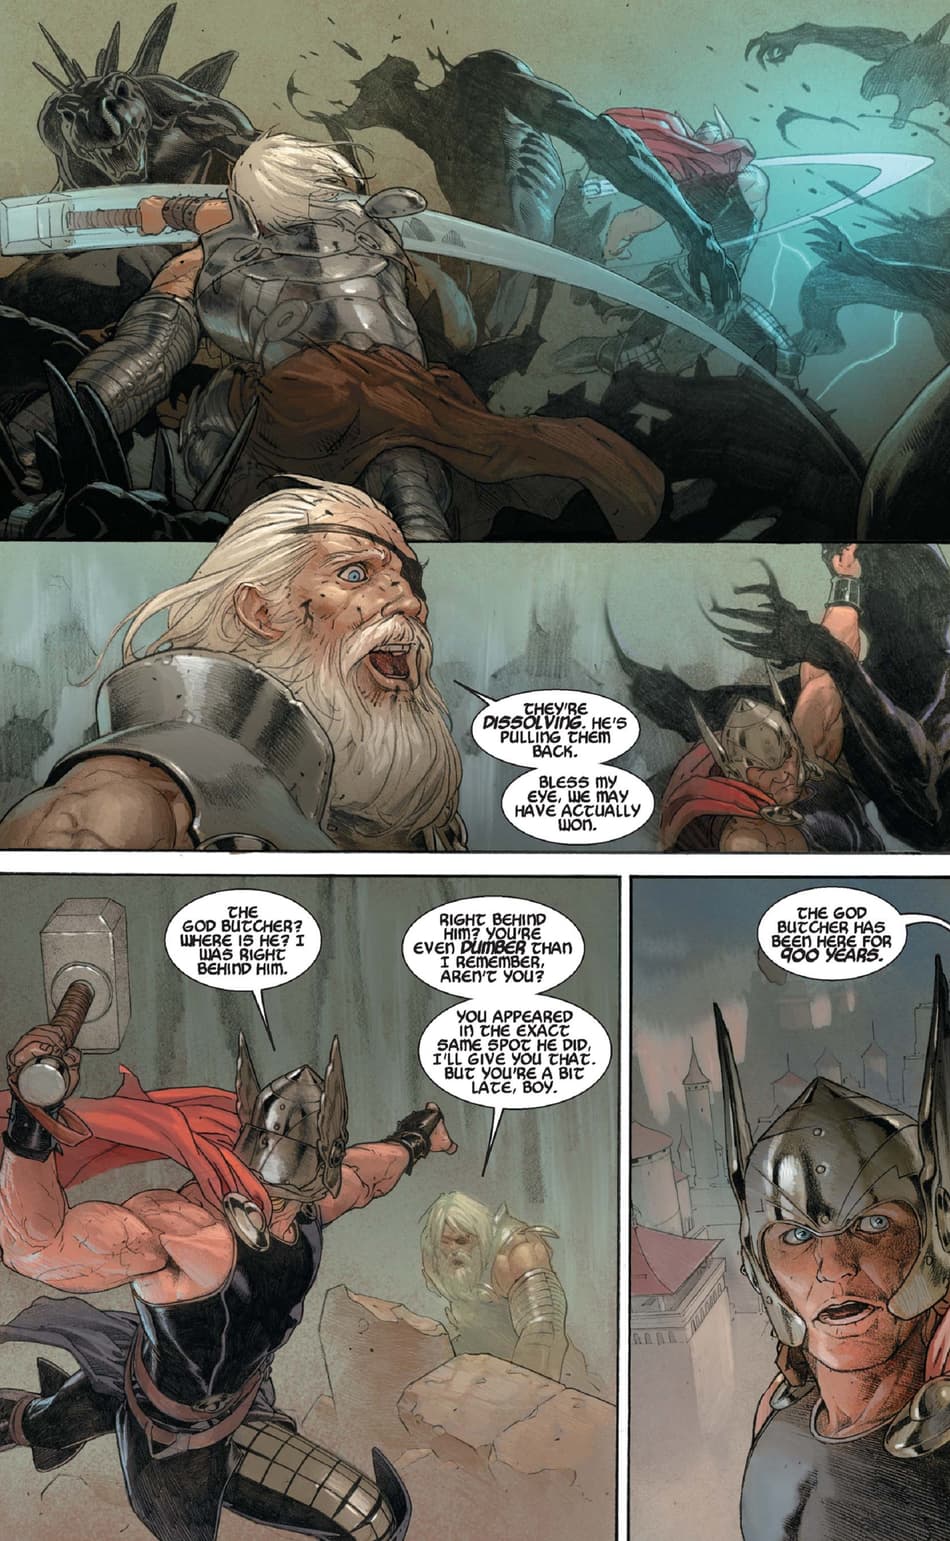 Thor confronts his future self about Gorr in THOR: GOD OF THUNDER (2012) #5.